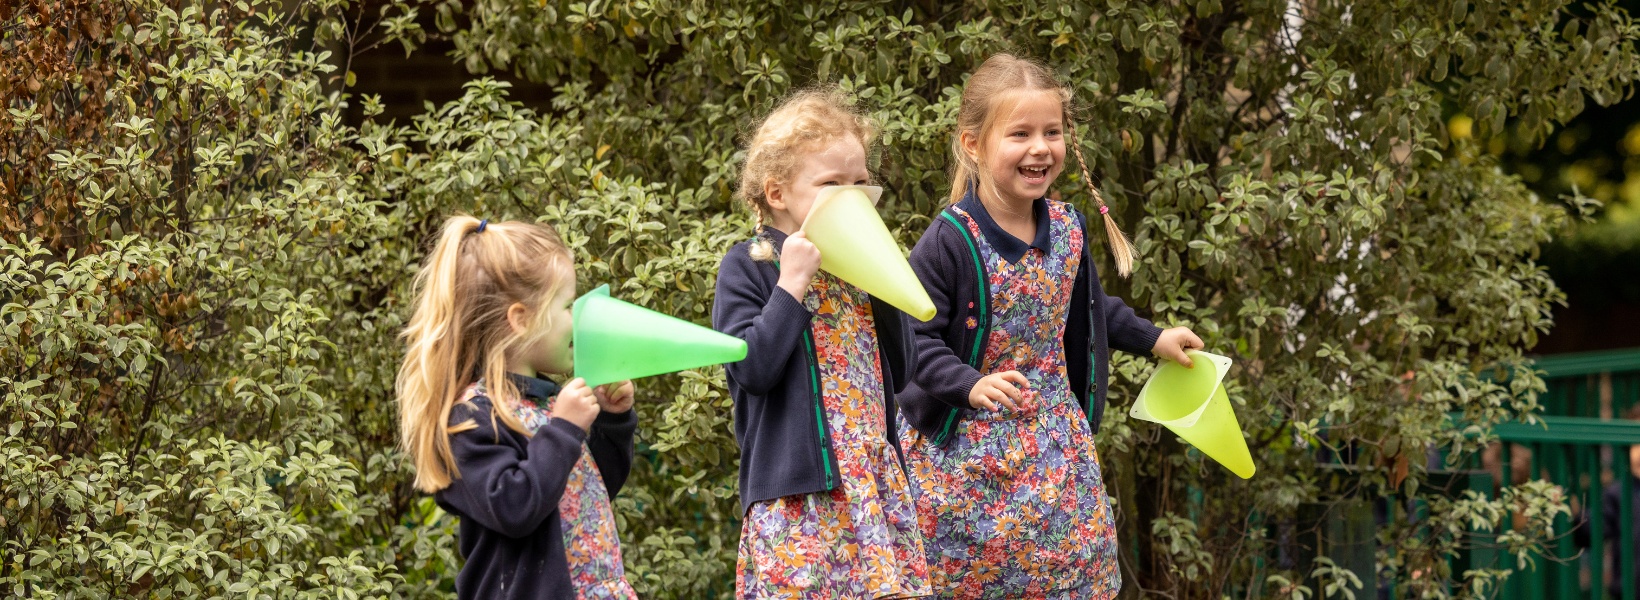 Pre-prep pupils playing with plastic cones at Ibstock Place School, a private school near Richmond